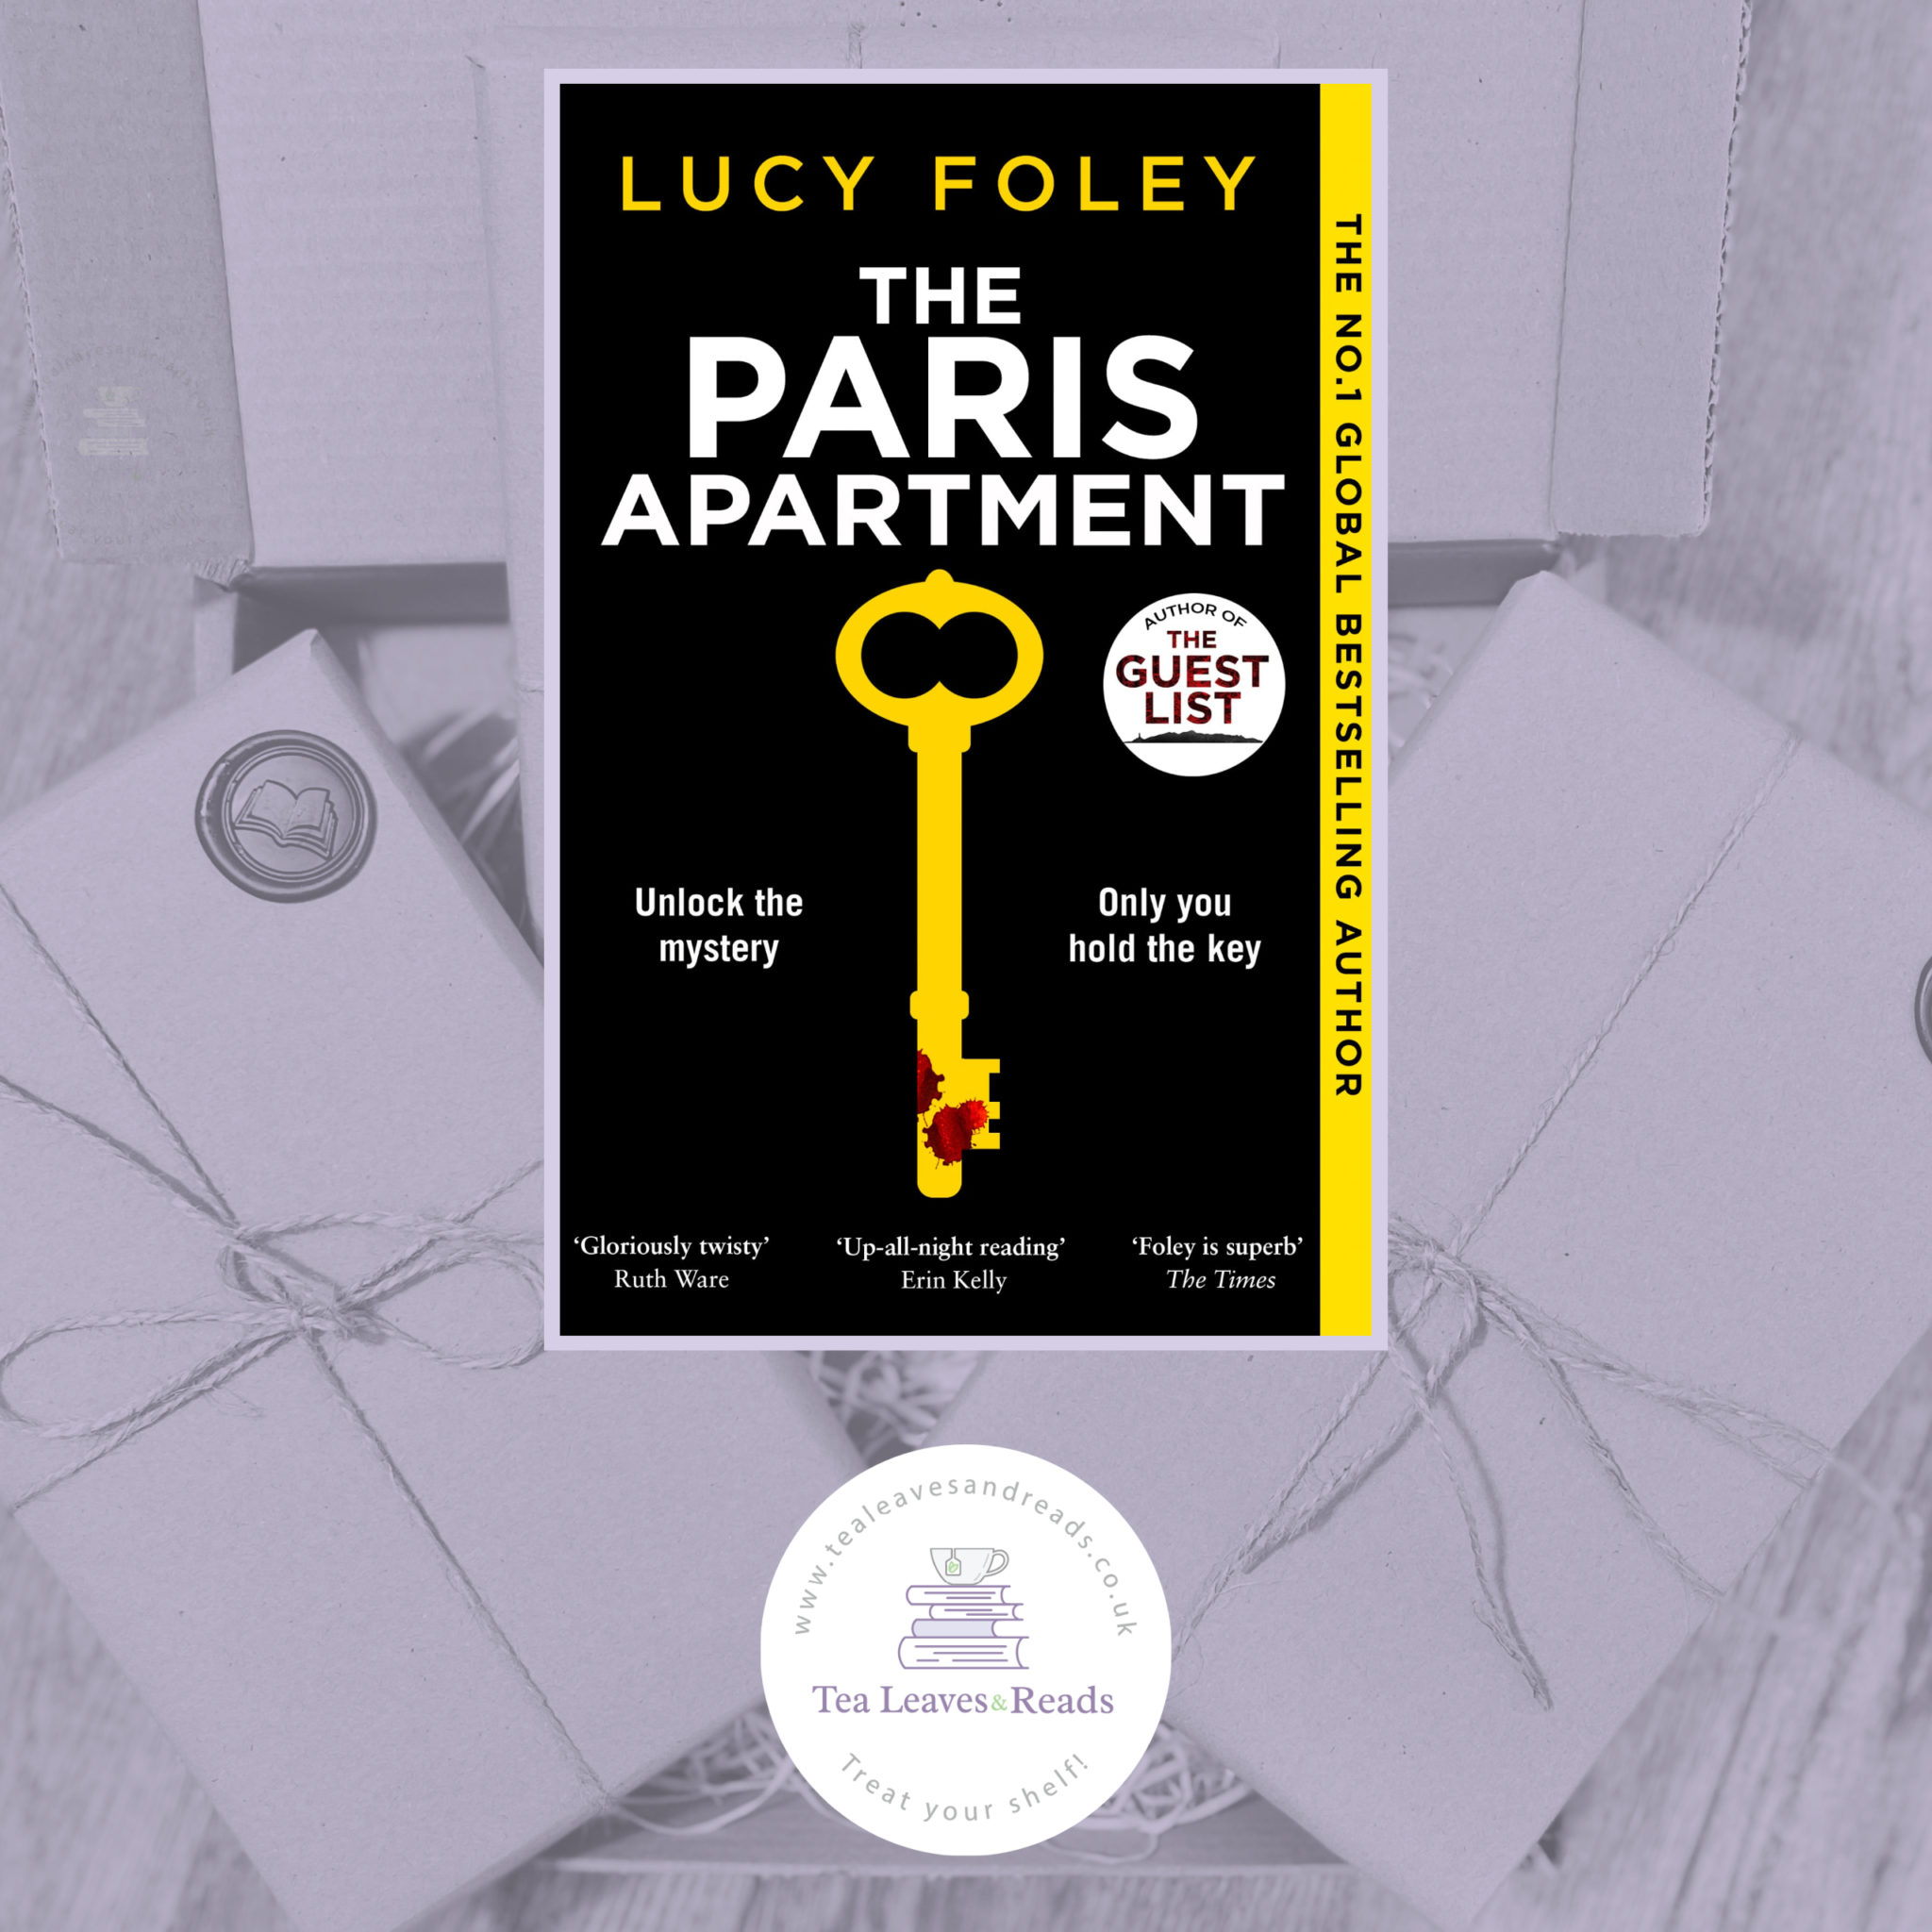 the paris apartment by lucy foley summary